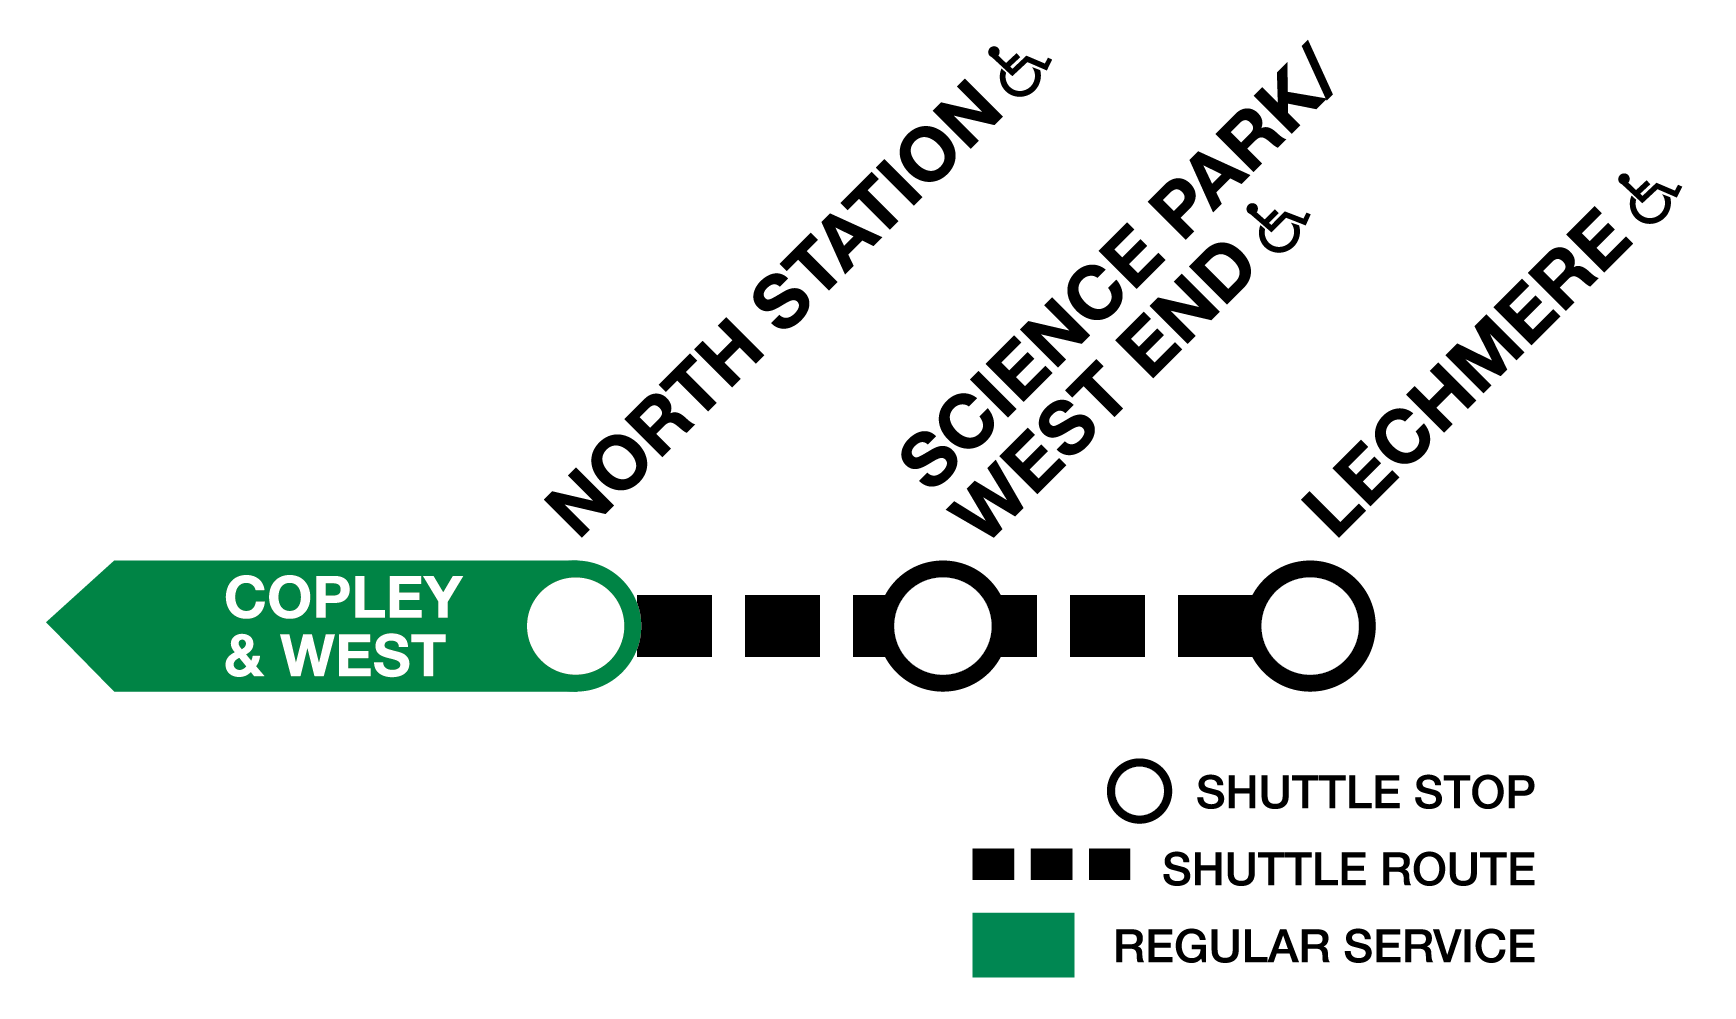 Green Line E diagram showing how bus shuttles replace trains between North Station and Lechmere